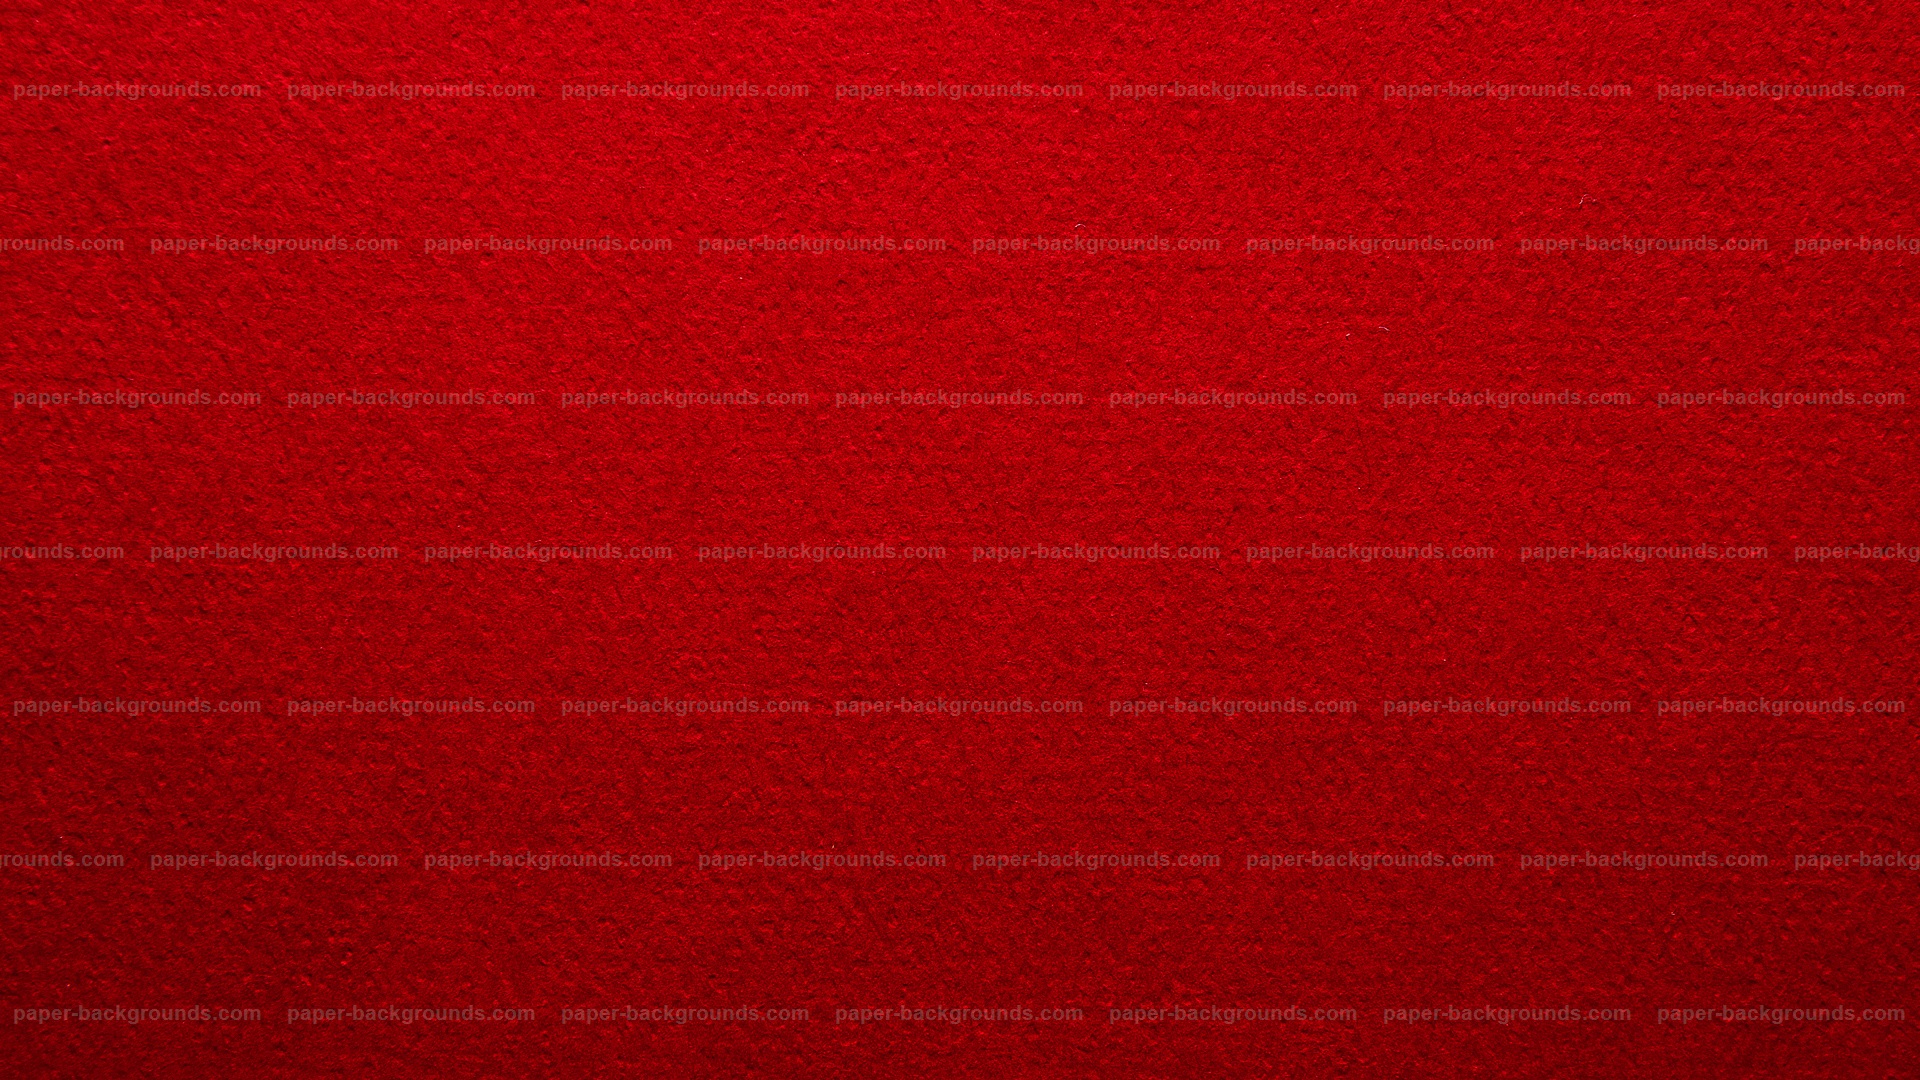 Red Texture Paper Background Full HD Resolution X 1080p